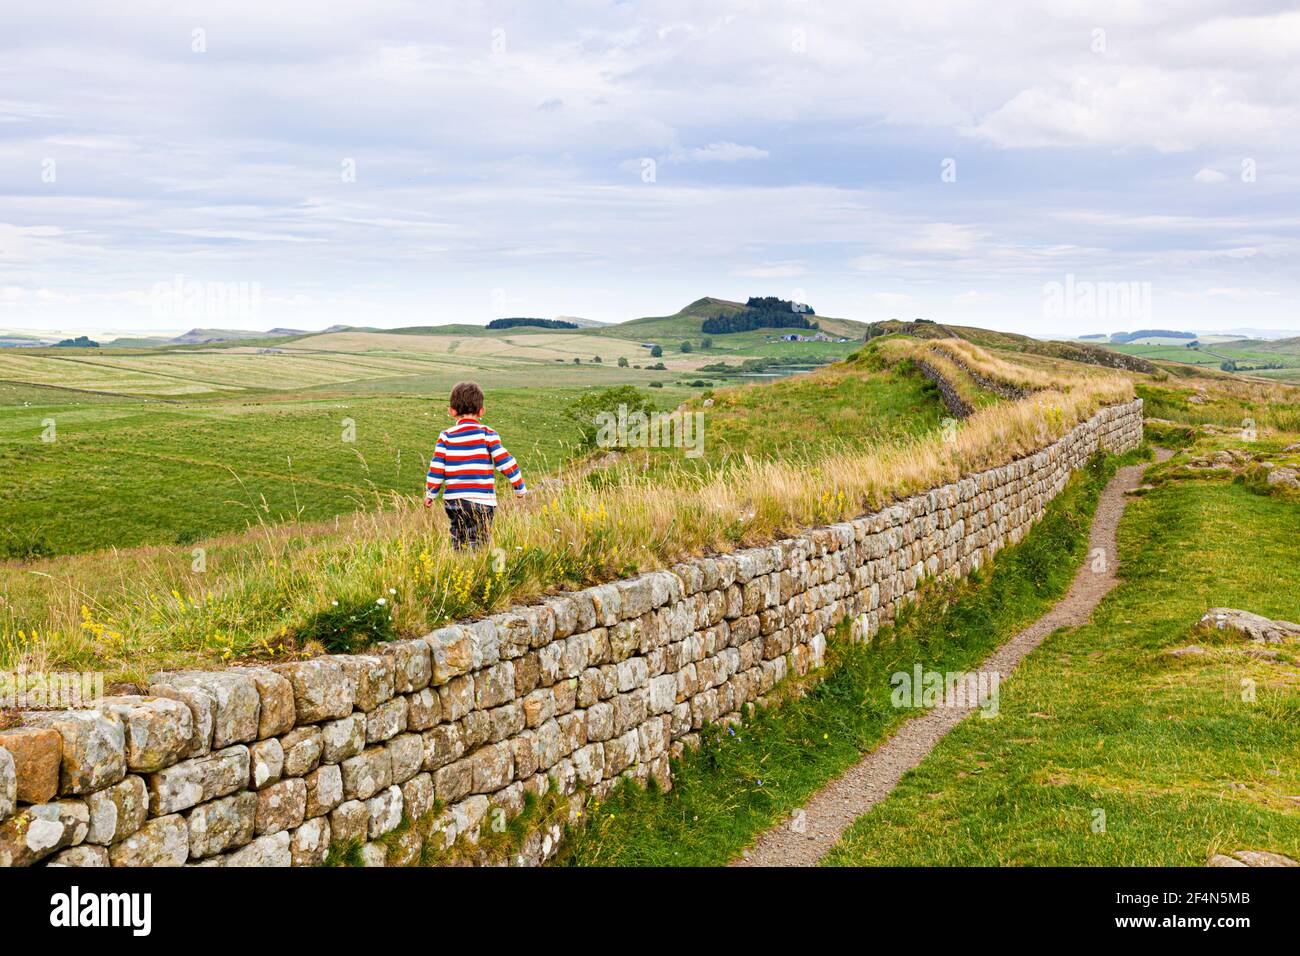 A small boy on Hadrians Wall at Steel Rig, Northumberland UK - NB Image No. C61BT4 shows his father at the same spot at the same age 31 years earlier.. Stock Photo